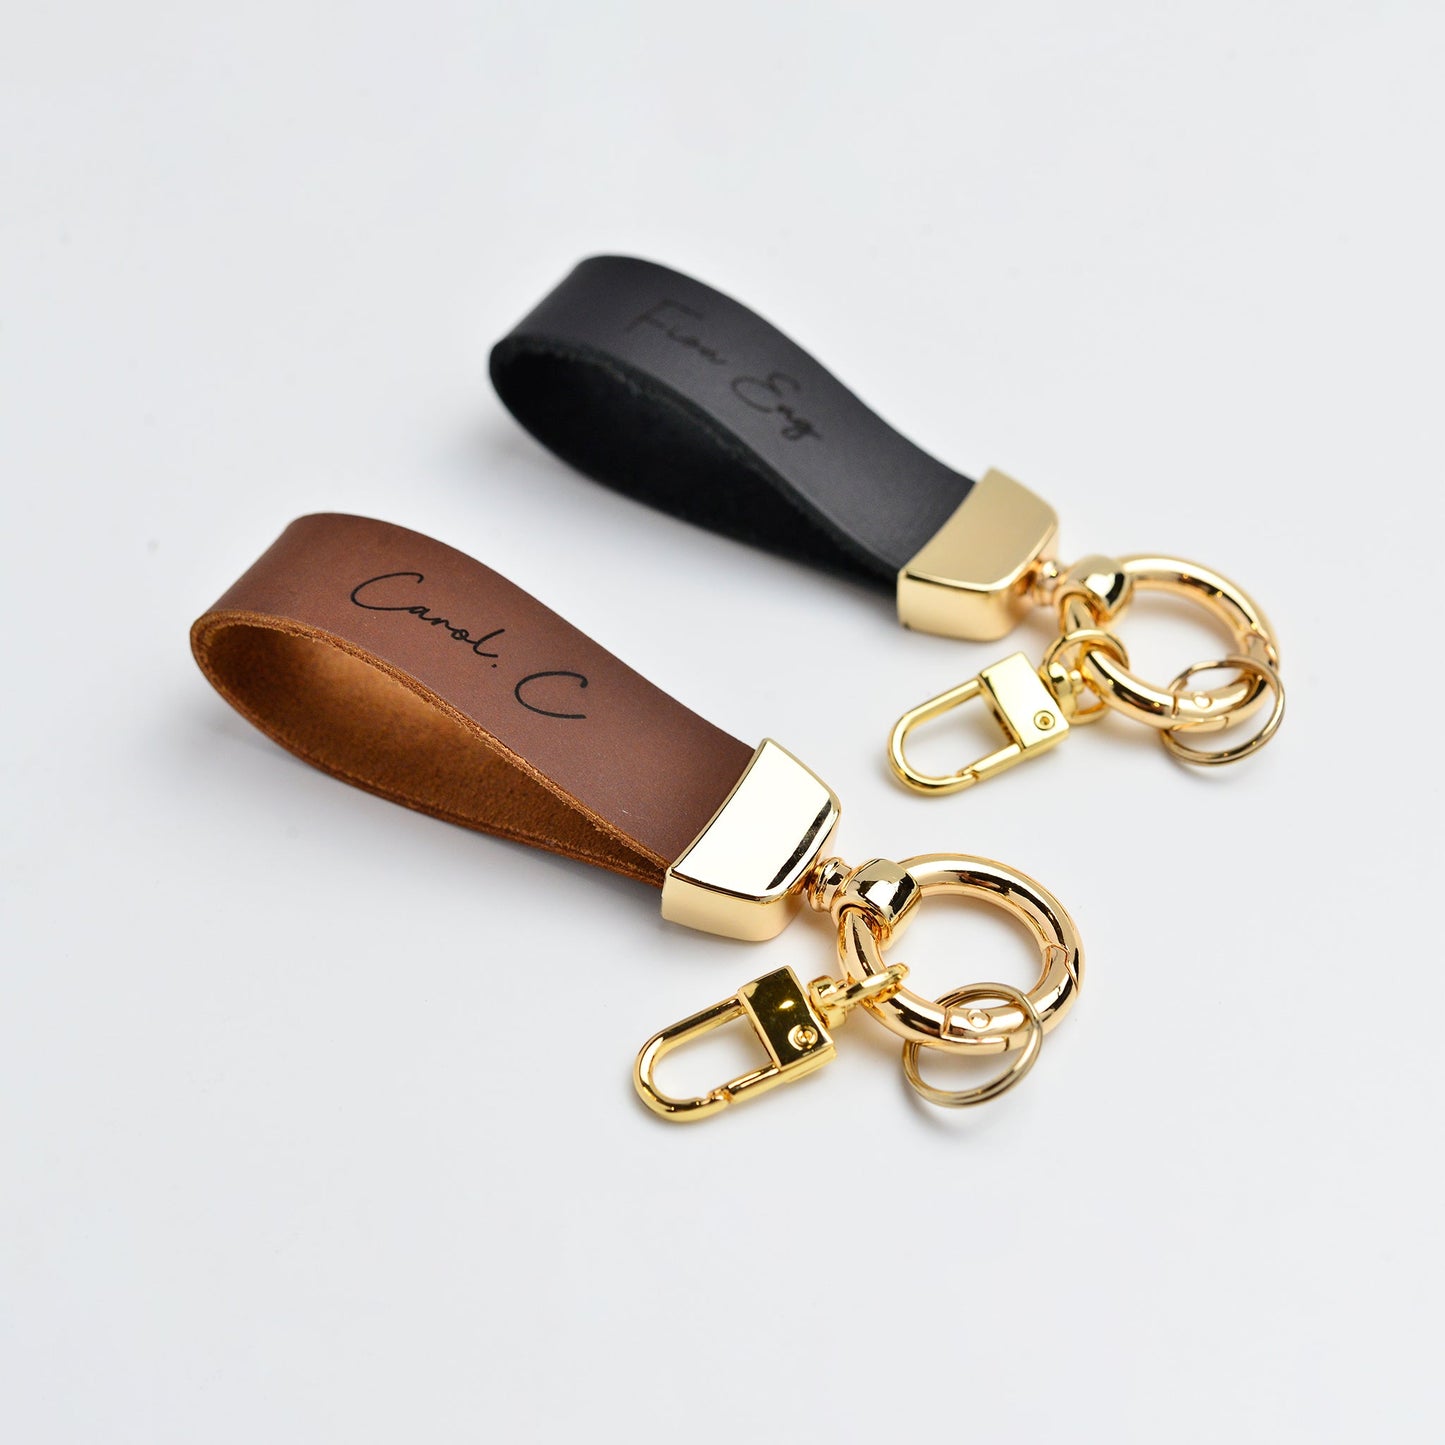 [Sweet Set A] Couple Hera Classic Leather Keychains + Wax Seal